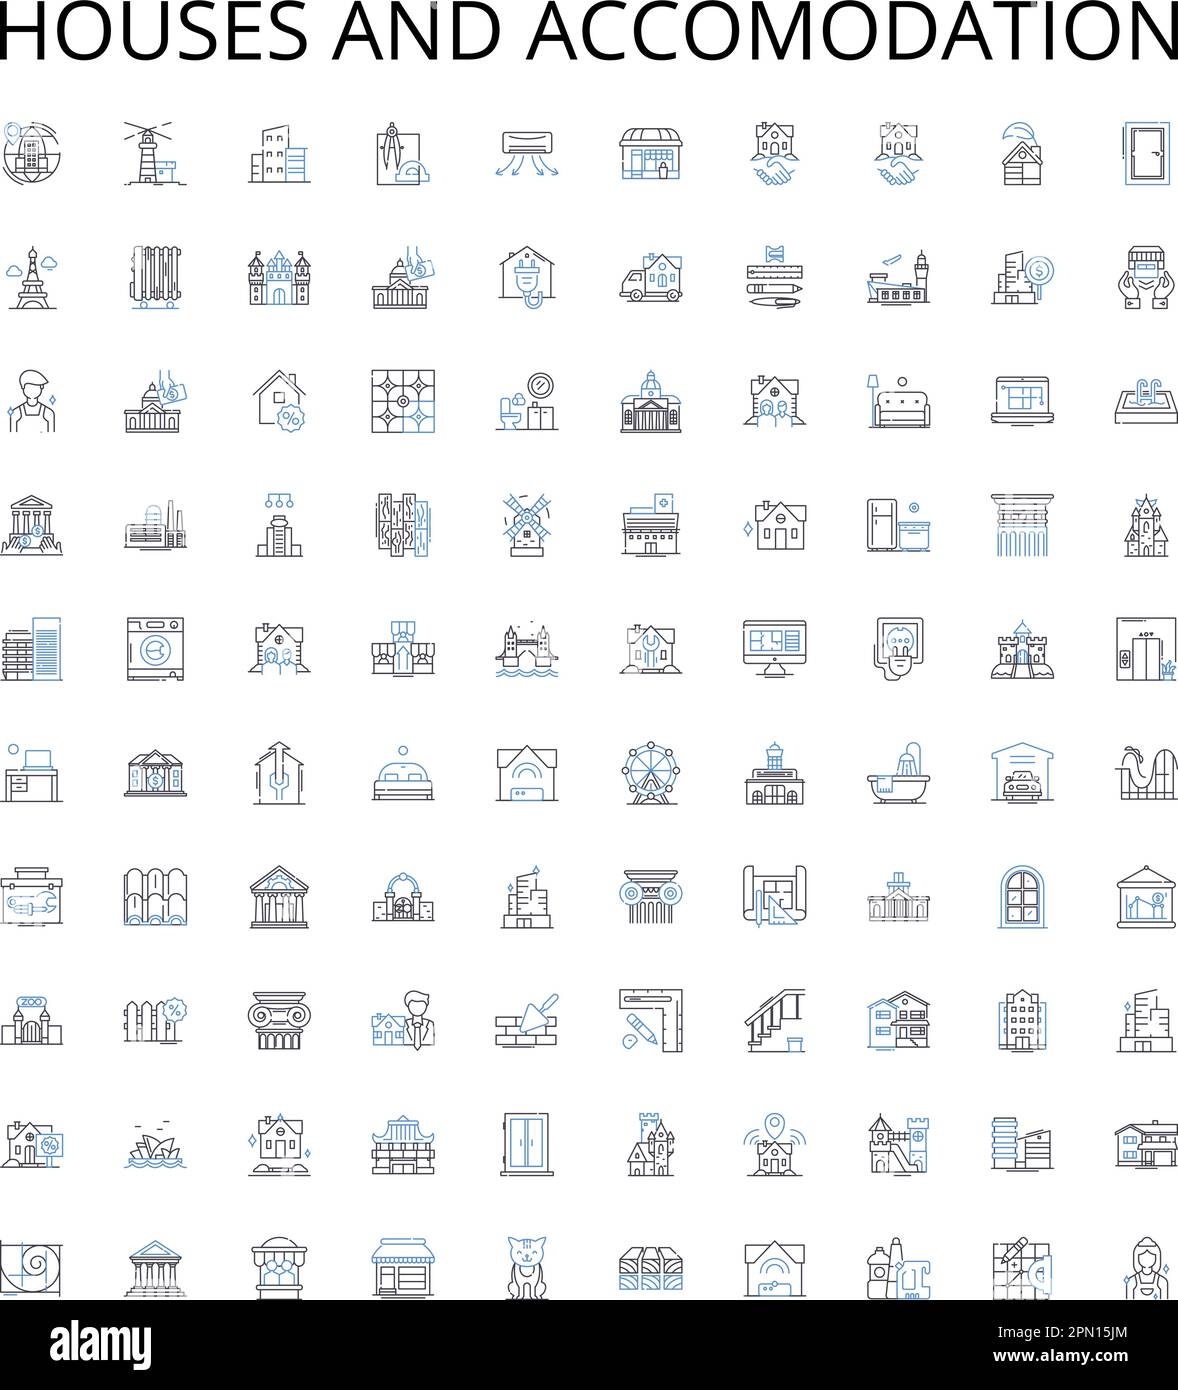 Houses and accomodation outline icons collection. Home, Accommodation, Residence, Abode, Lodging, Domicile, Dwelling vector illustration set. Villa Stock Vector